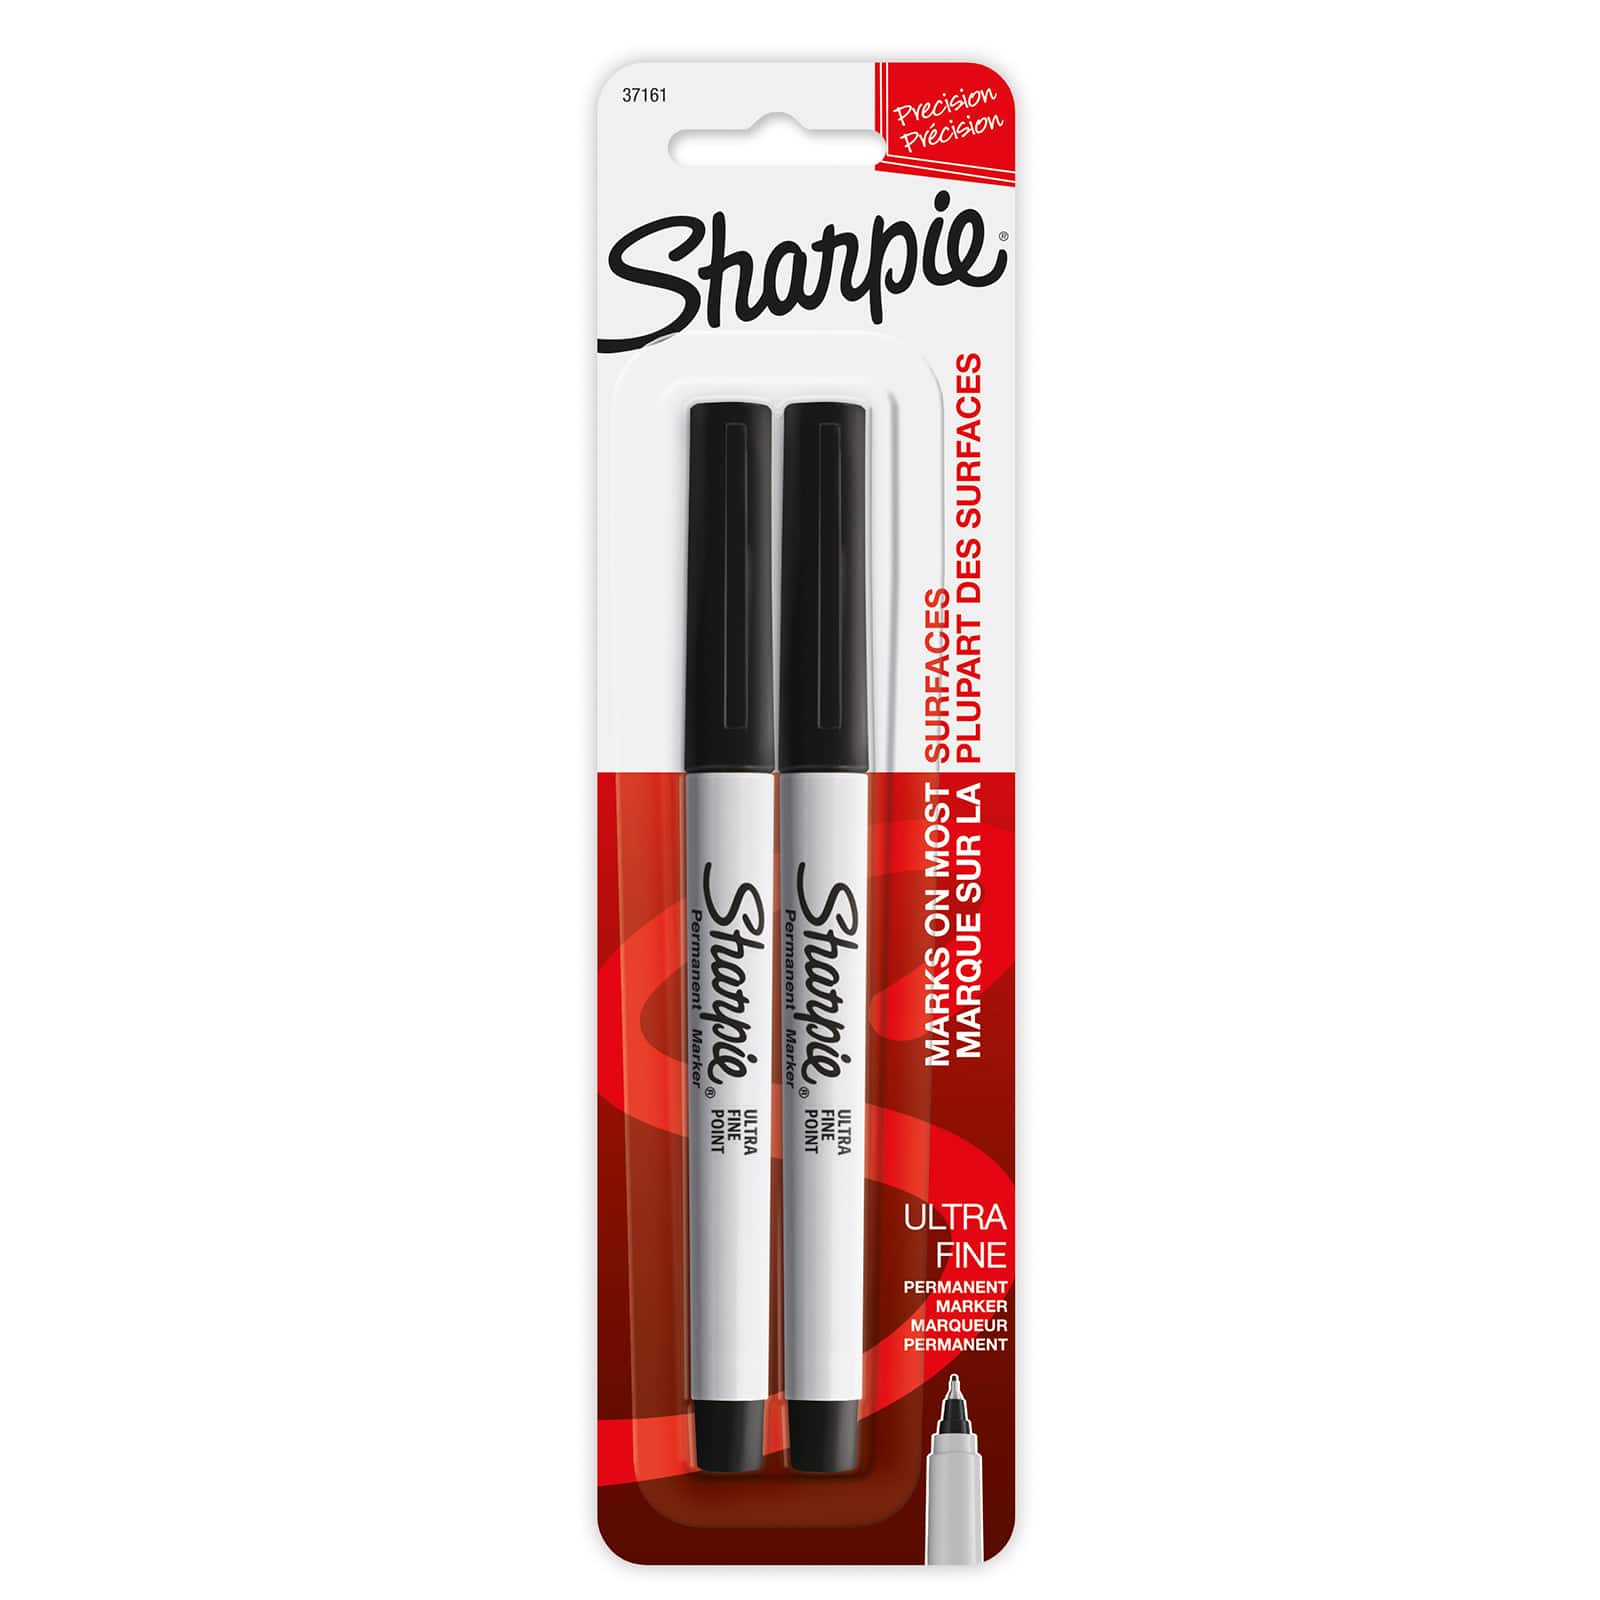 SHARPIE Permanent Markers, Ultra Fine Point, Black, 12-Count